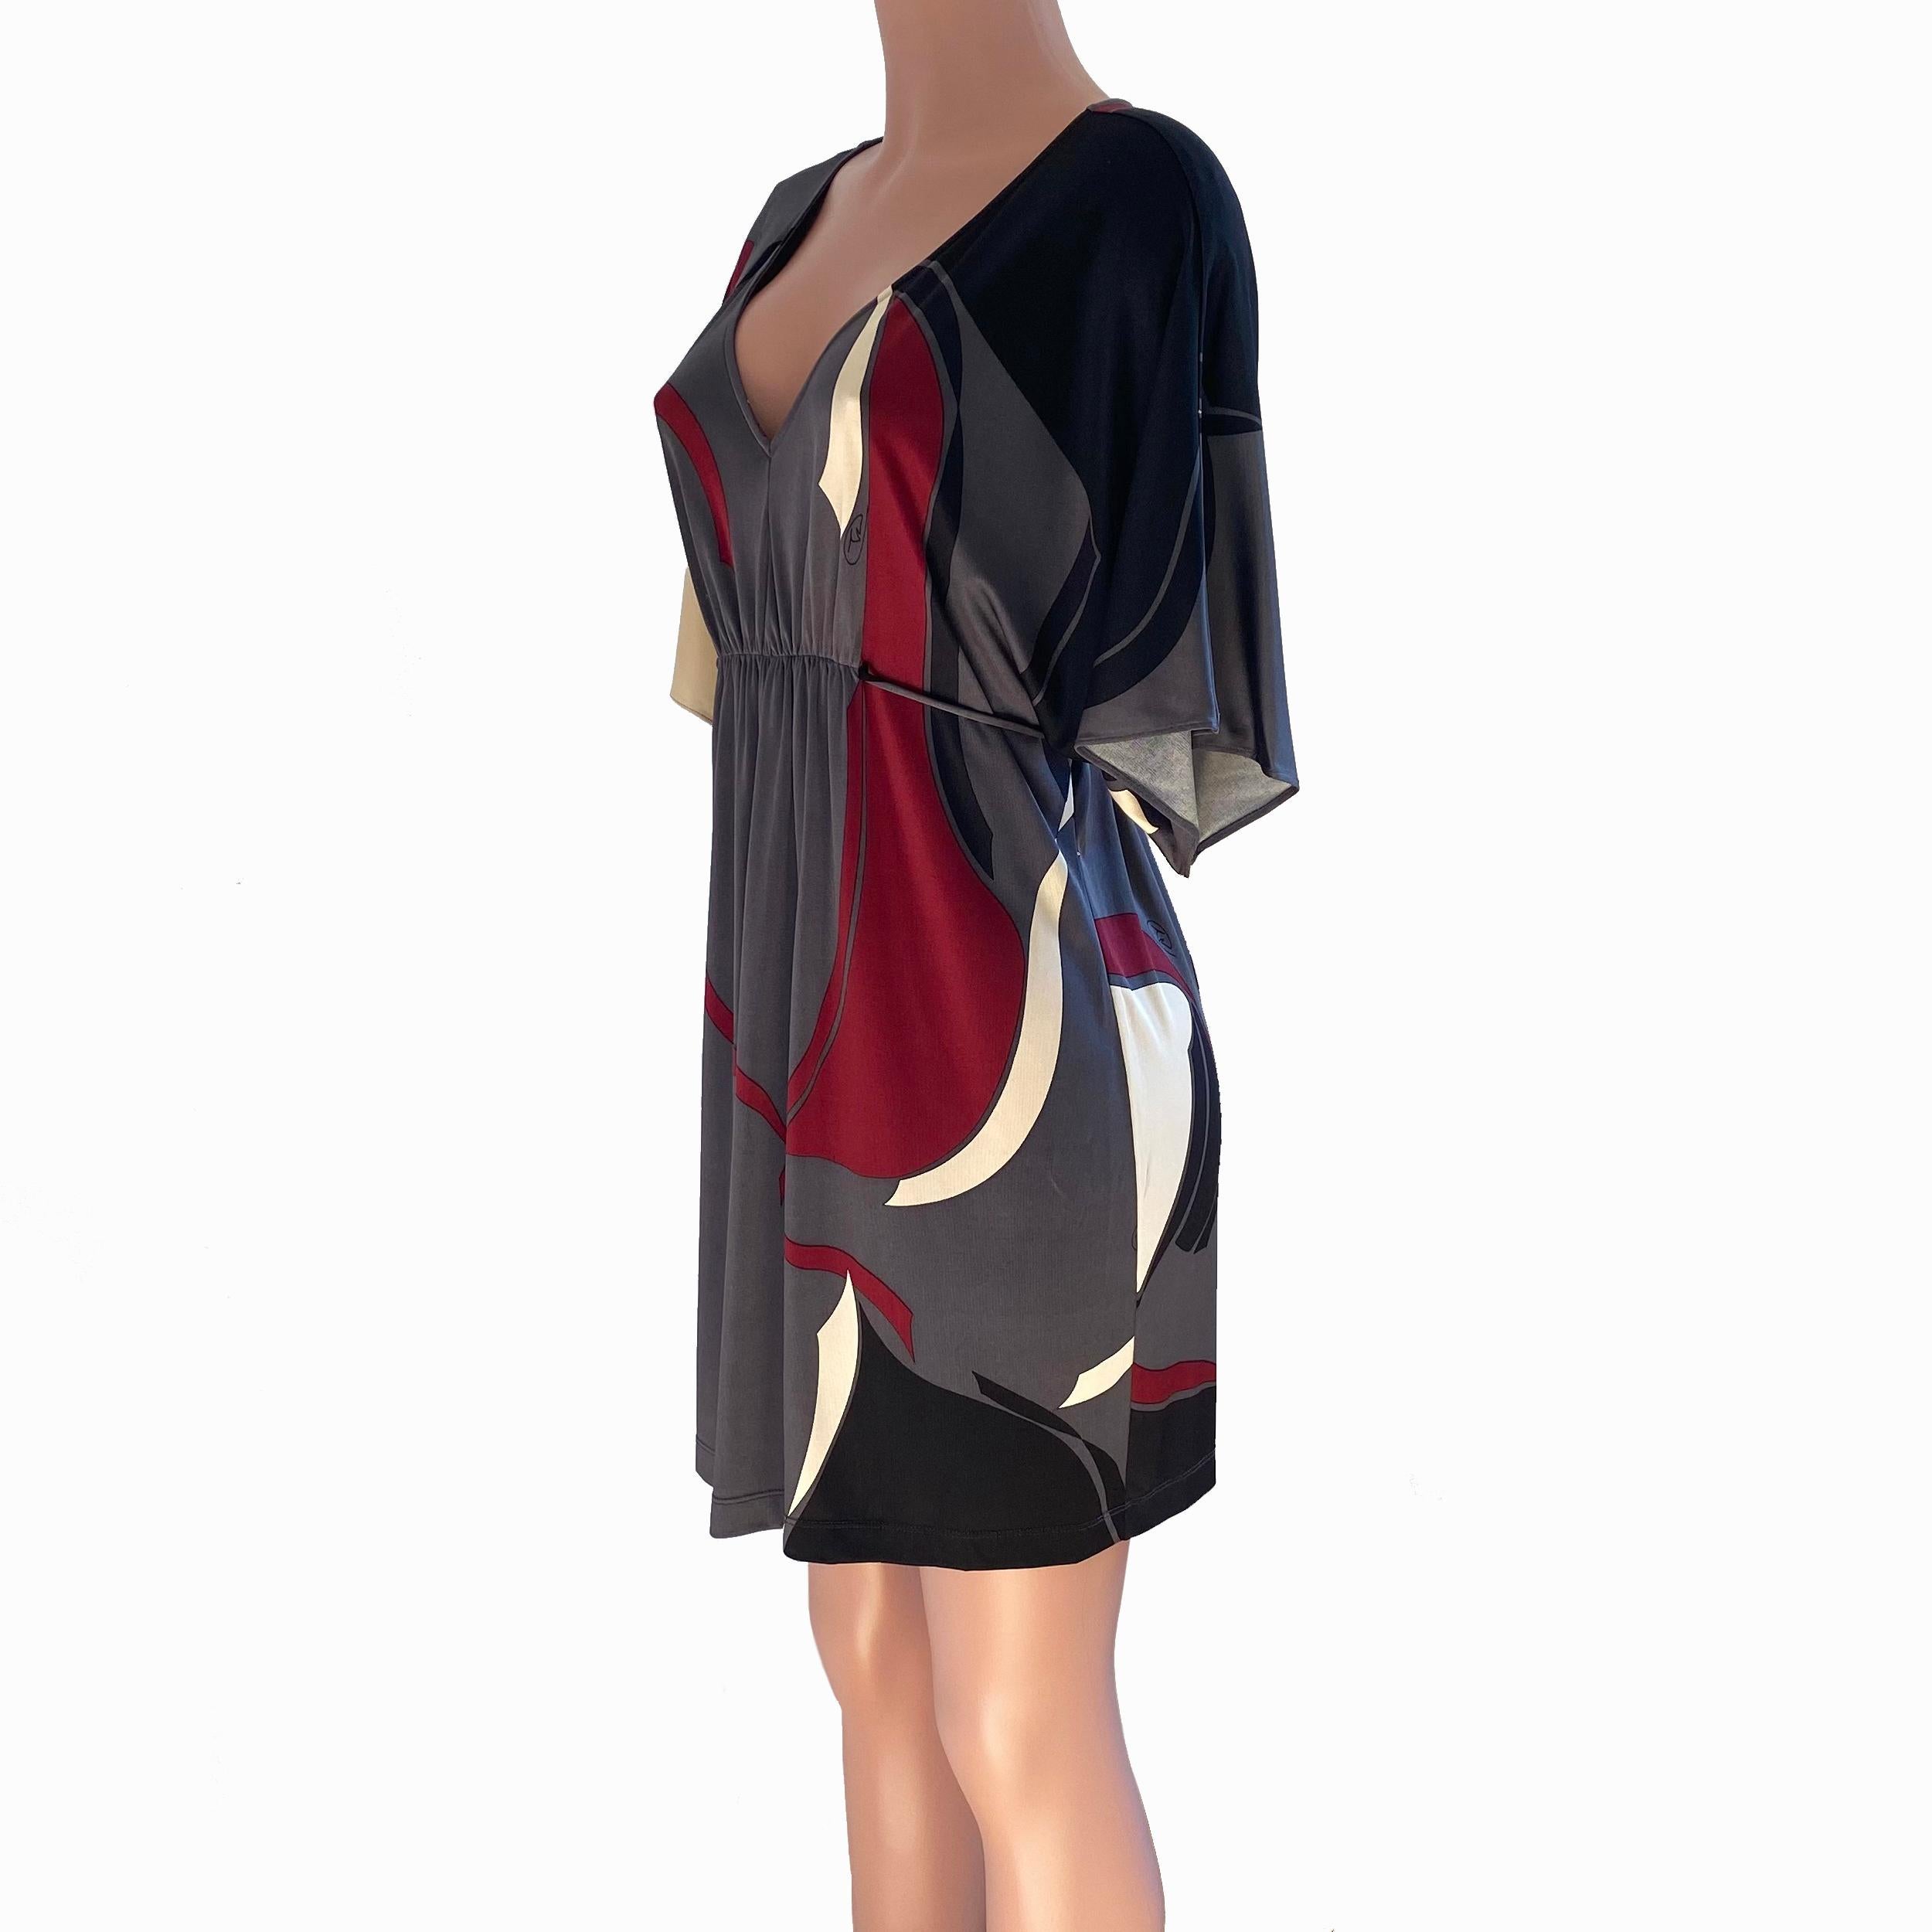 Deep V-neck easy cool silk jersey caftan 
Original colorblocked ribbon print from Flora Kung.
Can be tied at front or back, dressed up or down as a dress or with jeans/leggings. 
US 6 = UK 10 = French 38
Approximately 34